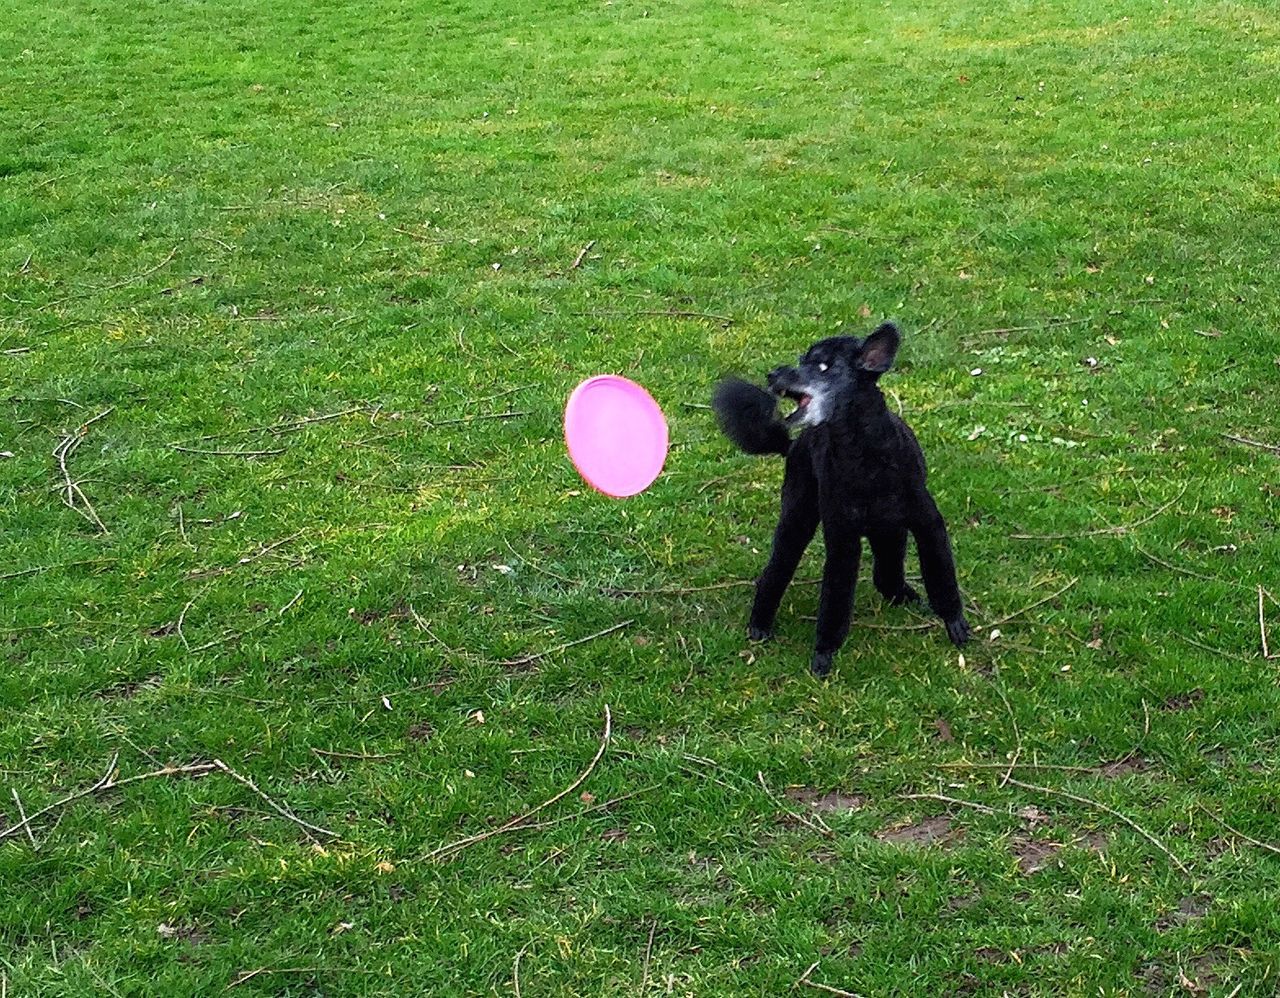 Dog playing with plastic disc on grassy field